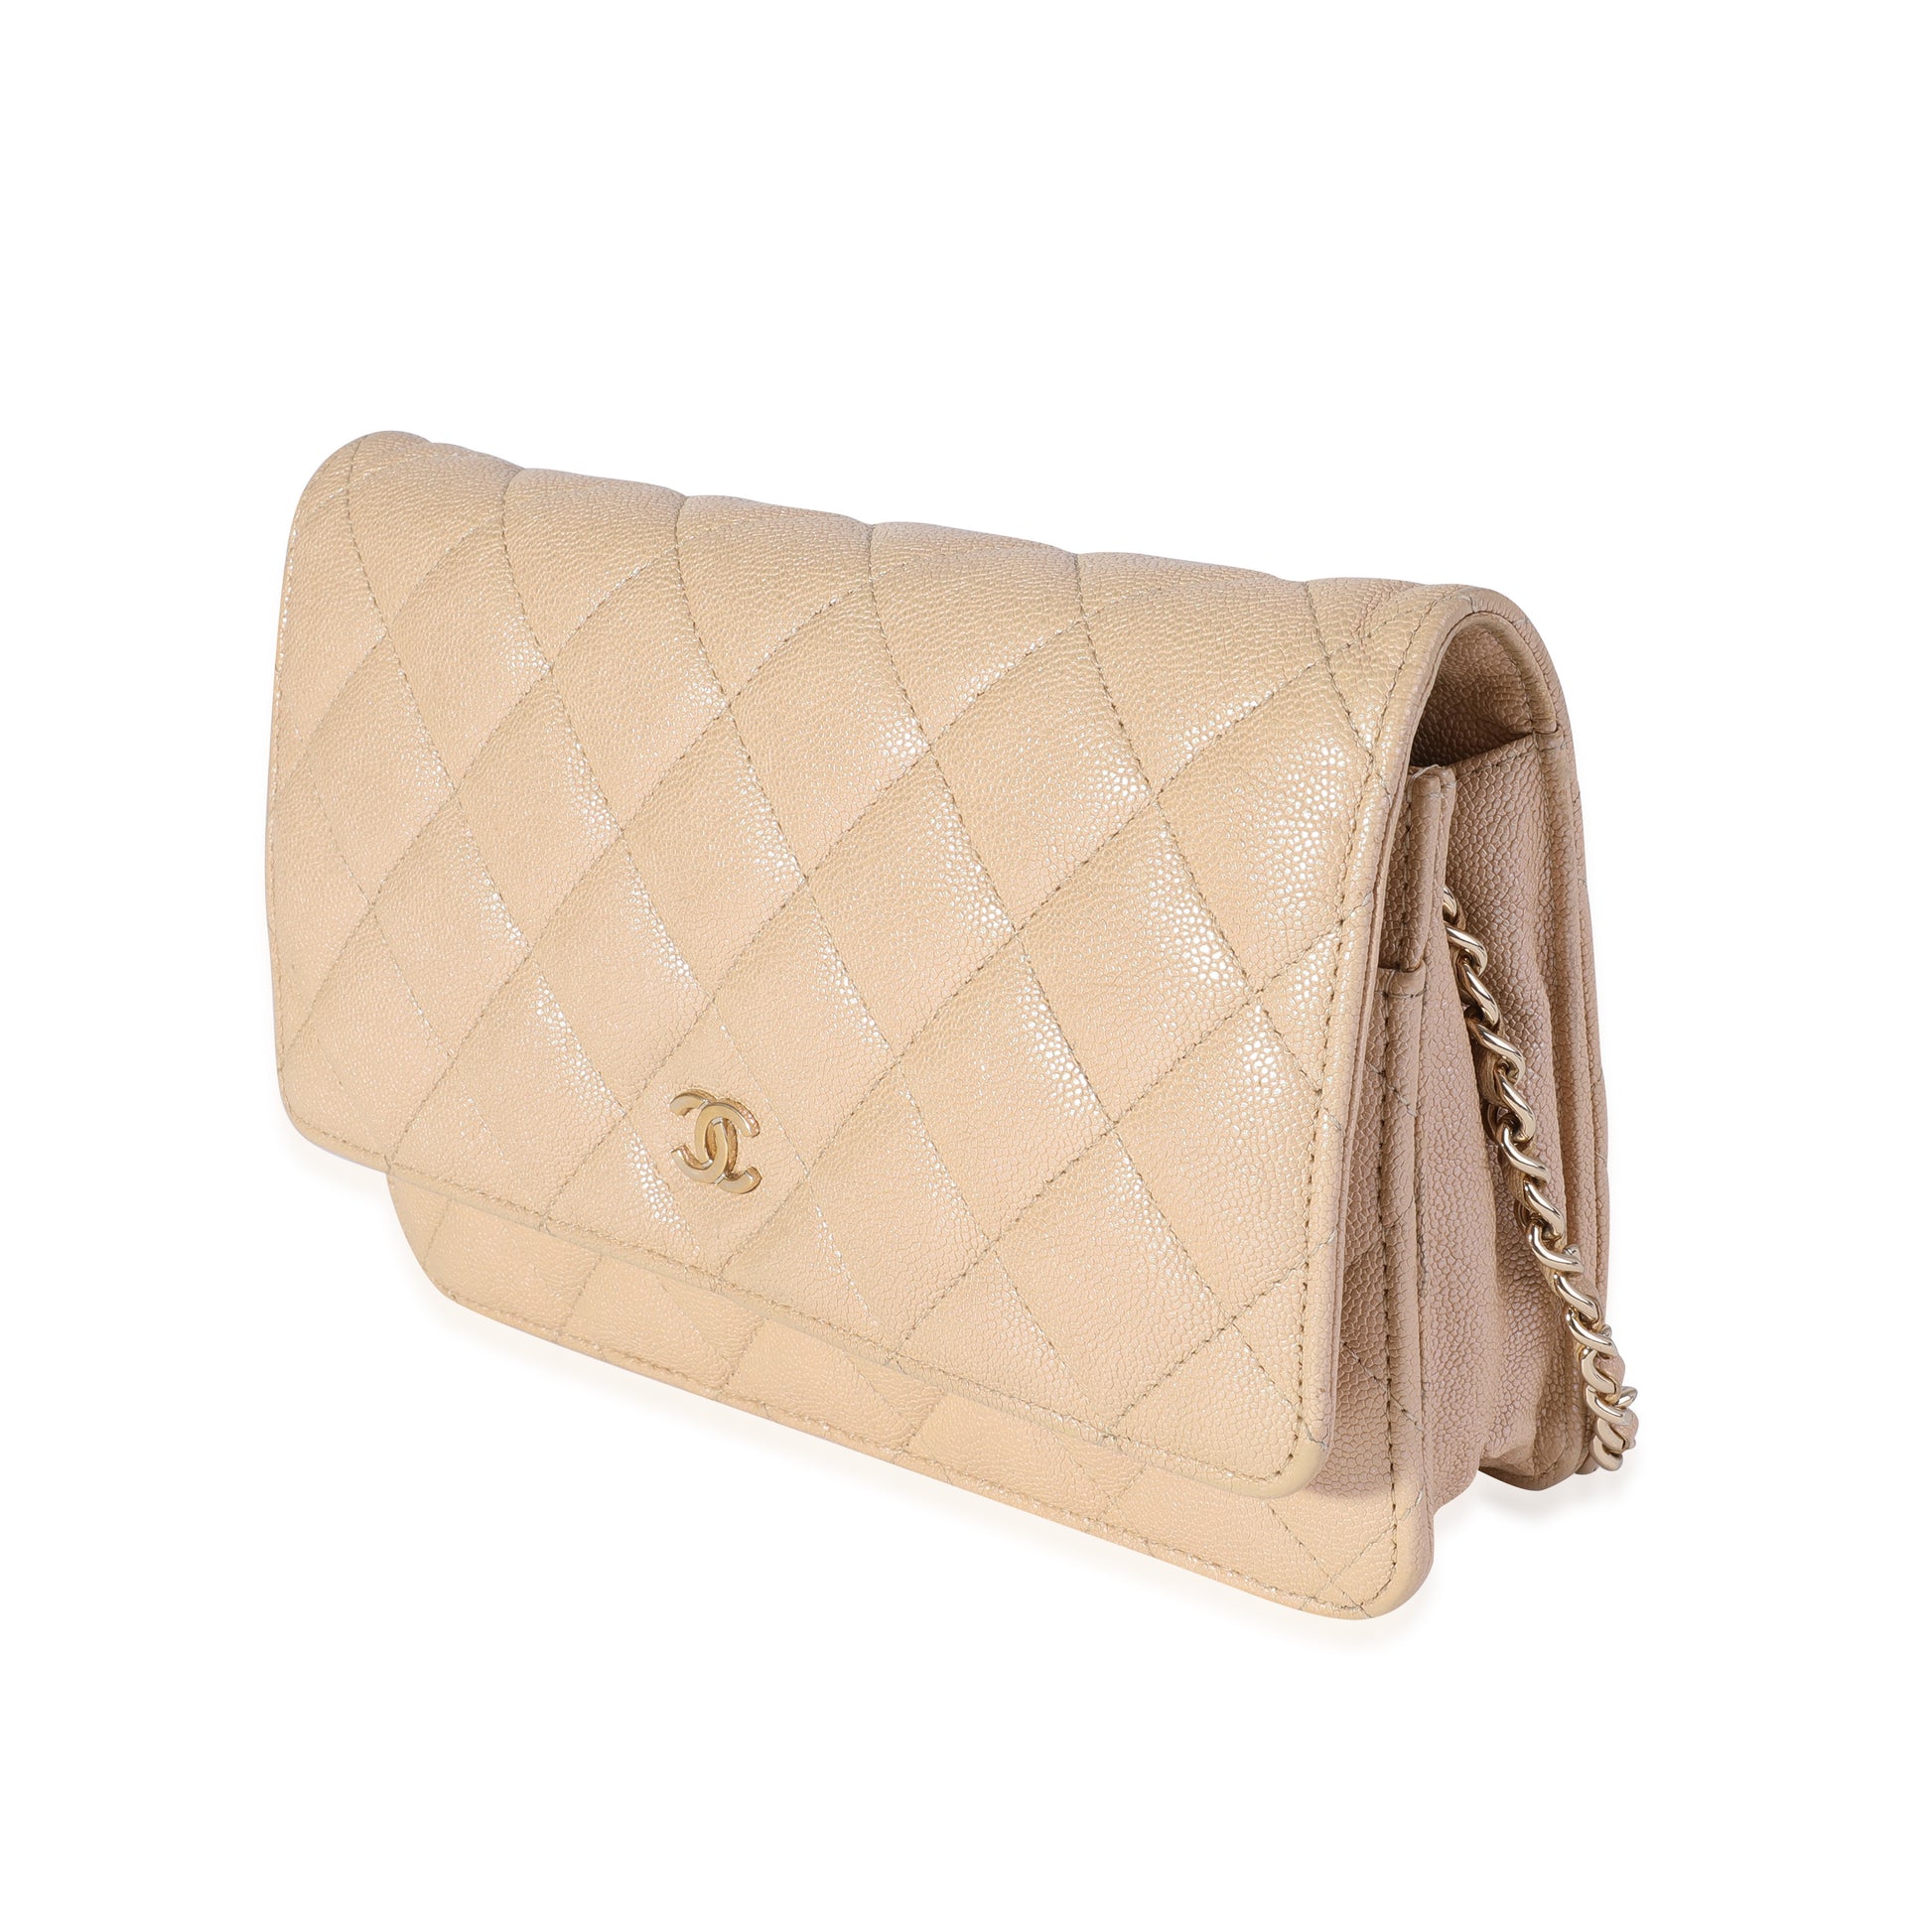 Chanel Light Beige Iridescent Quilted Caviar New Clutch With Chain